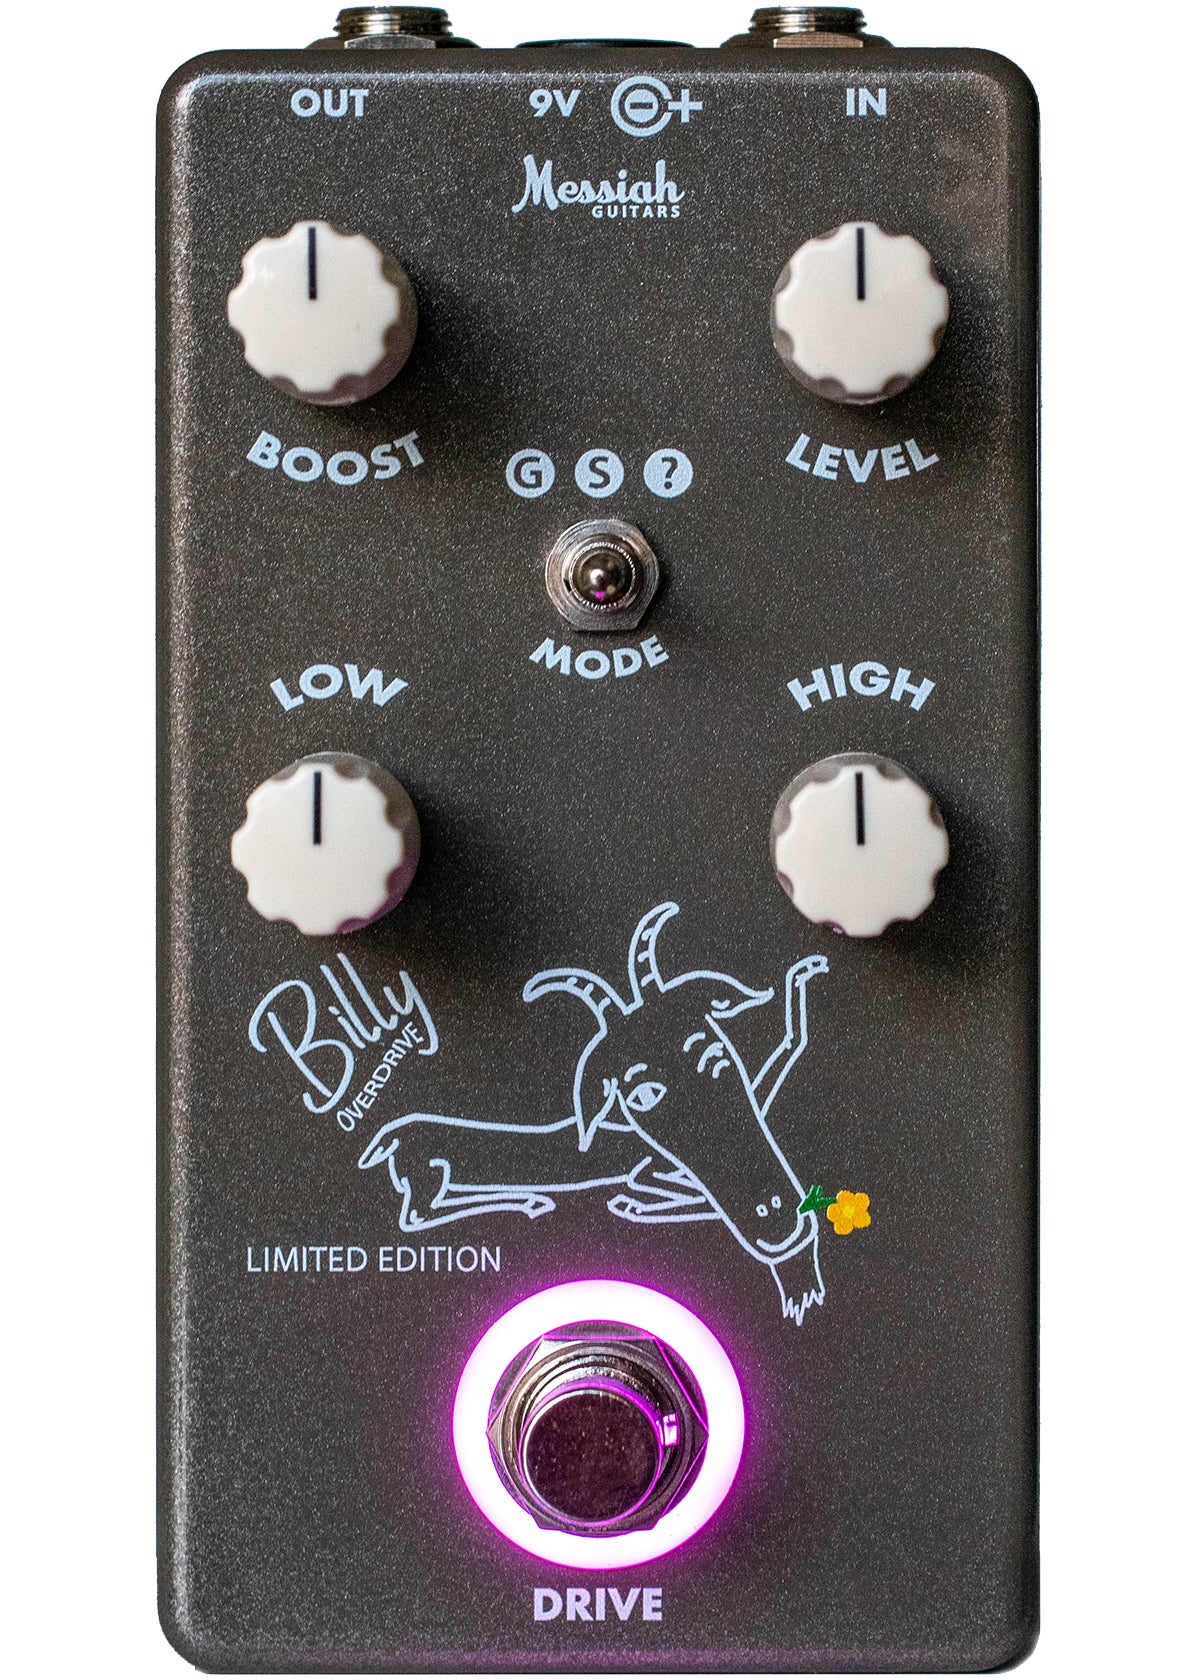 BILLY LIMITED EDITION - guitar overdrive pedal (USA)